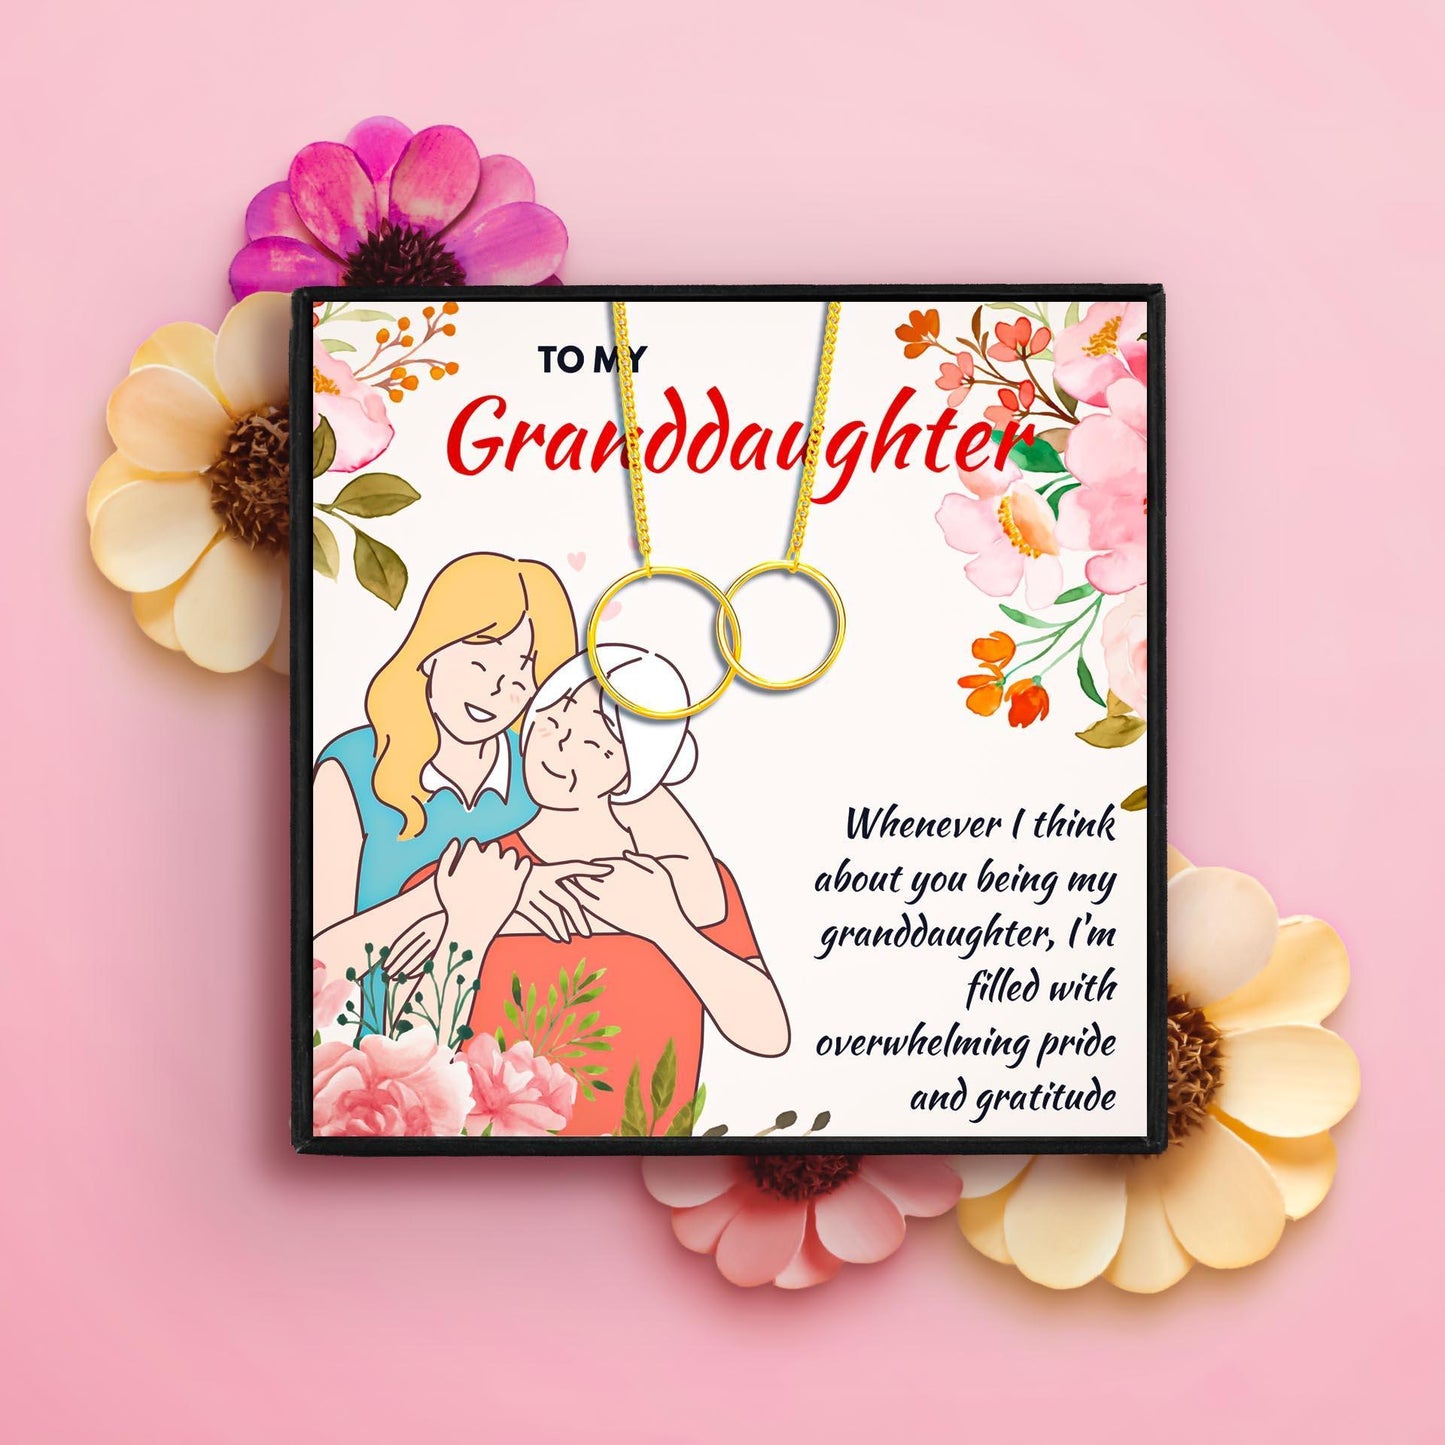 Birthday Gifts For Granddaughter From Grandma in 2023 | Birthday Gifts For Granddaughter From Grandma - undefined | granddaughter gifts from nana, Granddaughter Necklace, granddaughter necklace from grandma, grandma granddaughter necklace, grandmother granddaughter gifts | From Hunny Life | hunnylife.com